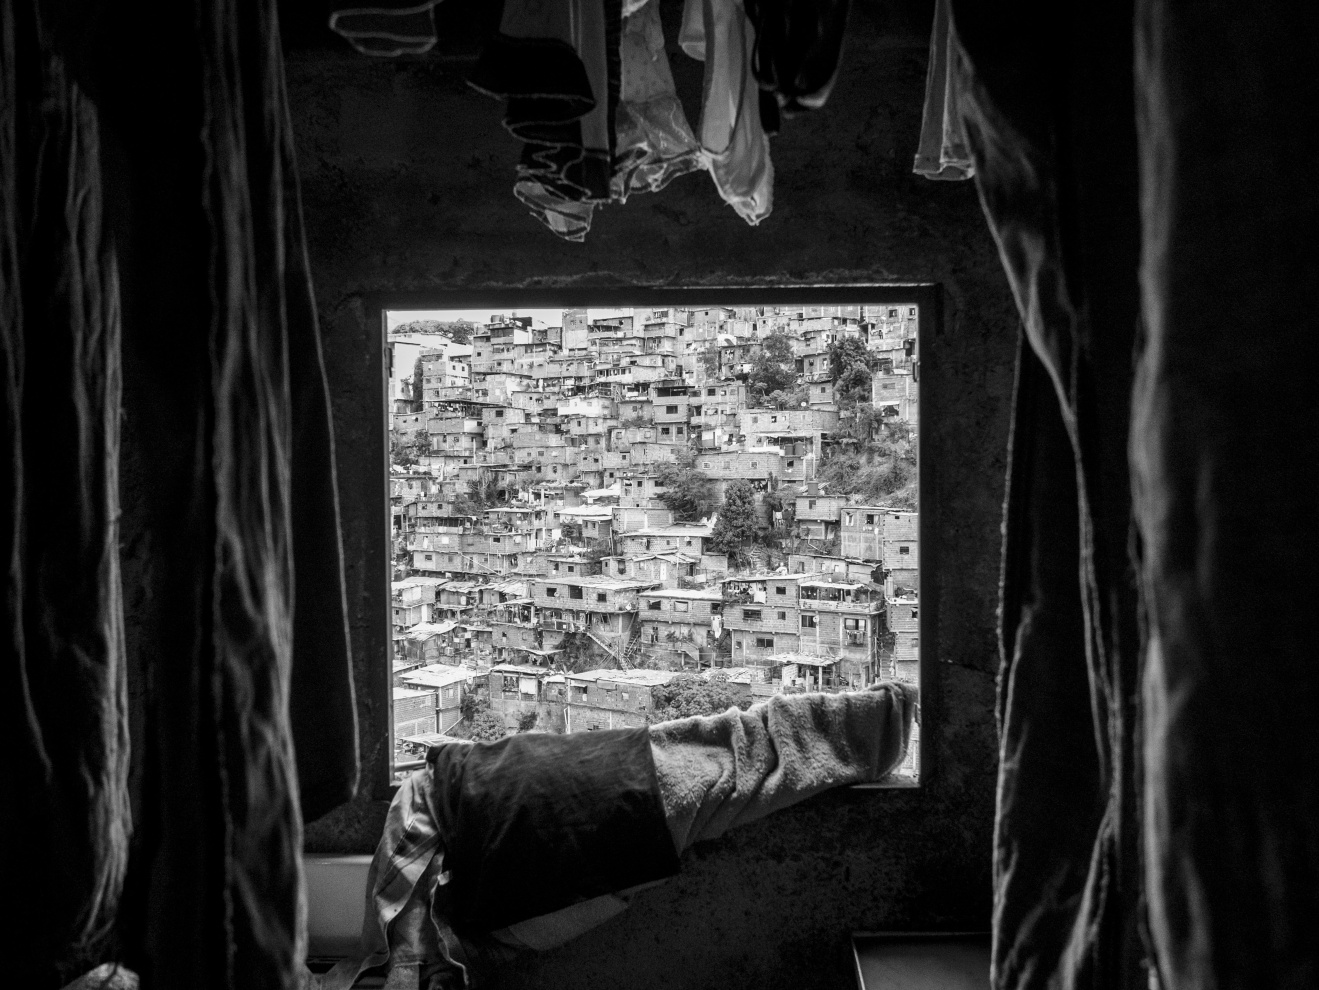 Venezuela; Miranda; Petare; 2015

View of a Barrio of Petare. Petare, one of South America’s largest slums, is located just outside Caracas, Venezuela’s capital city. During the night, the city becomes what is considered one of the most dangerous areas of Venezuela, counting the highest number of homicides per year.